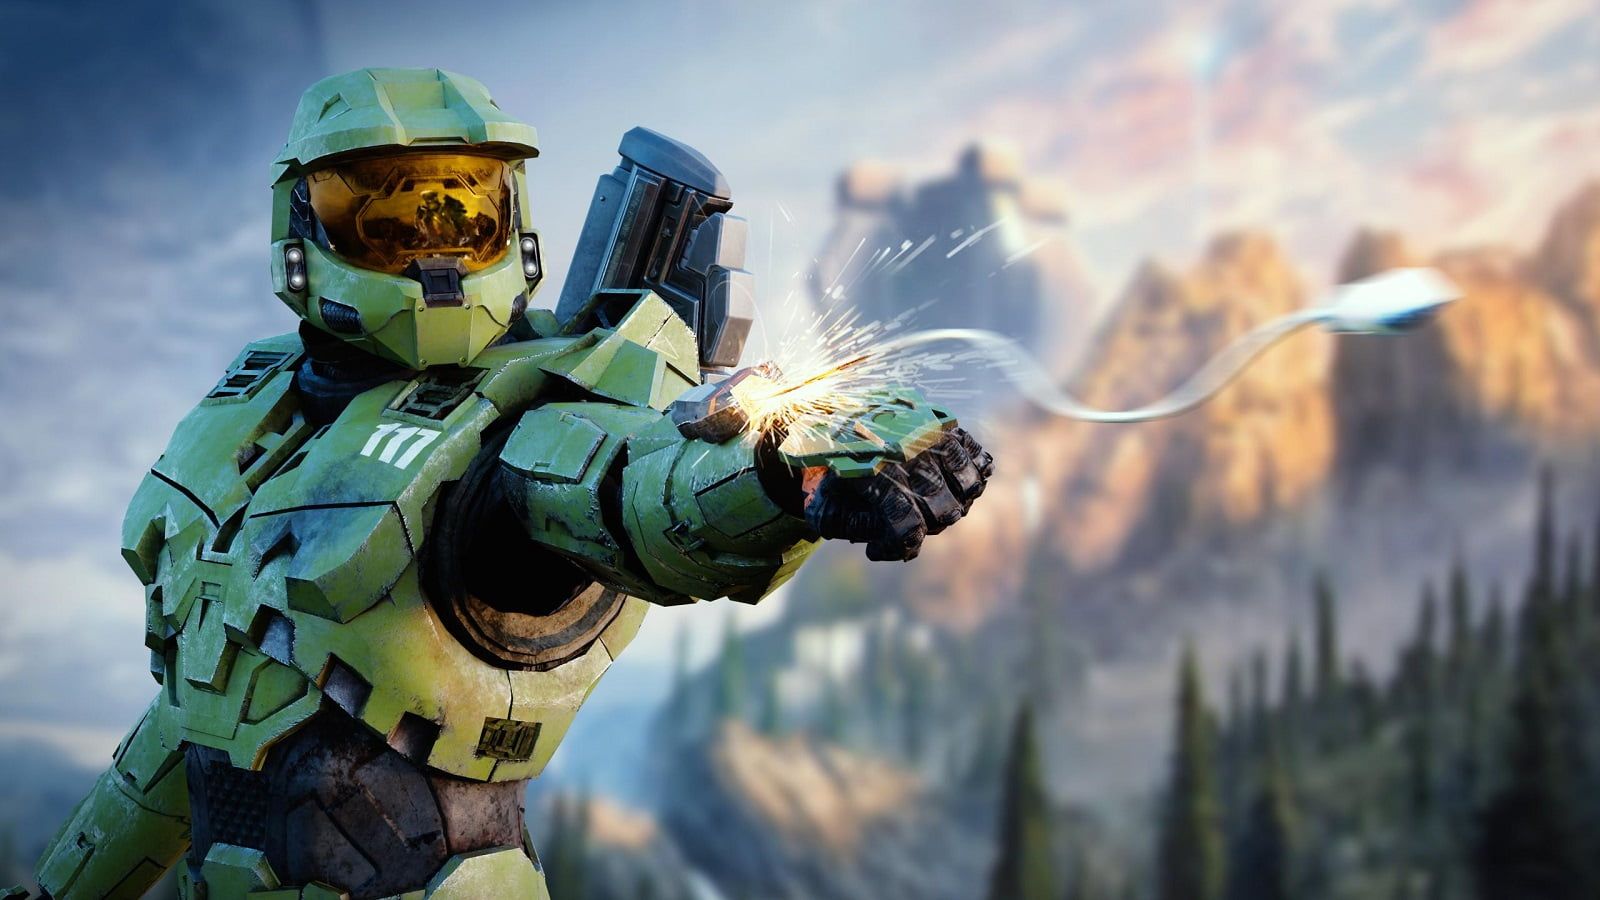 Halo Master Chief with Grapple Hook